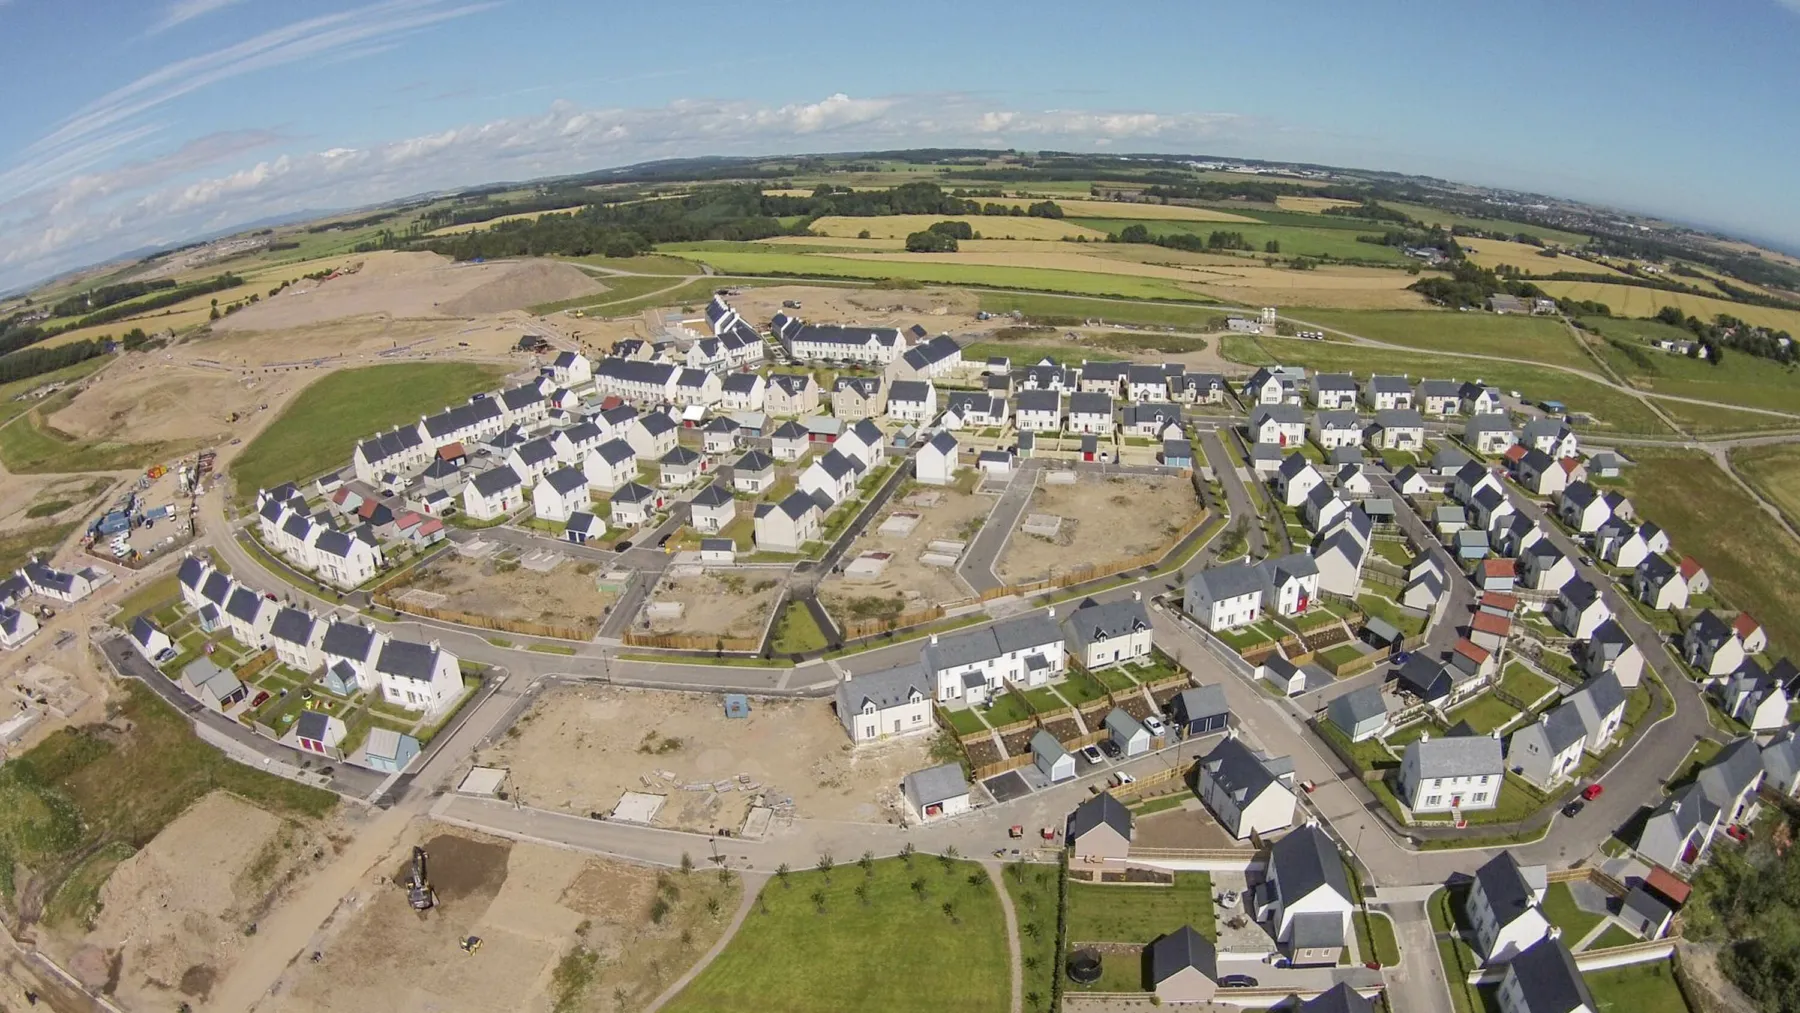 The new village at Chapelton of Elsick seen from the air. Ground works and construction continues at the edge of the photograph. The site is surrounded by farmland and containse several streets in a grid and crescent formation